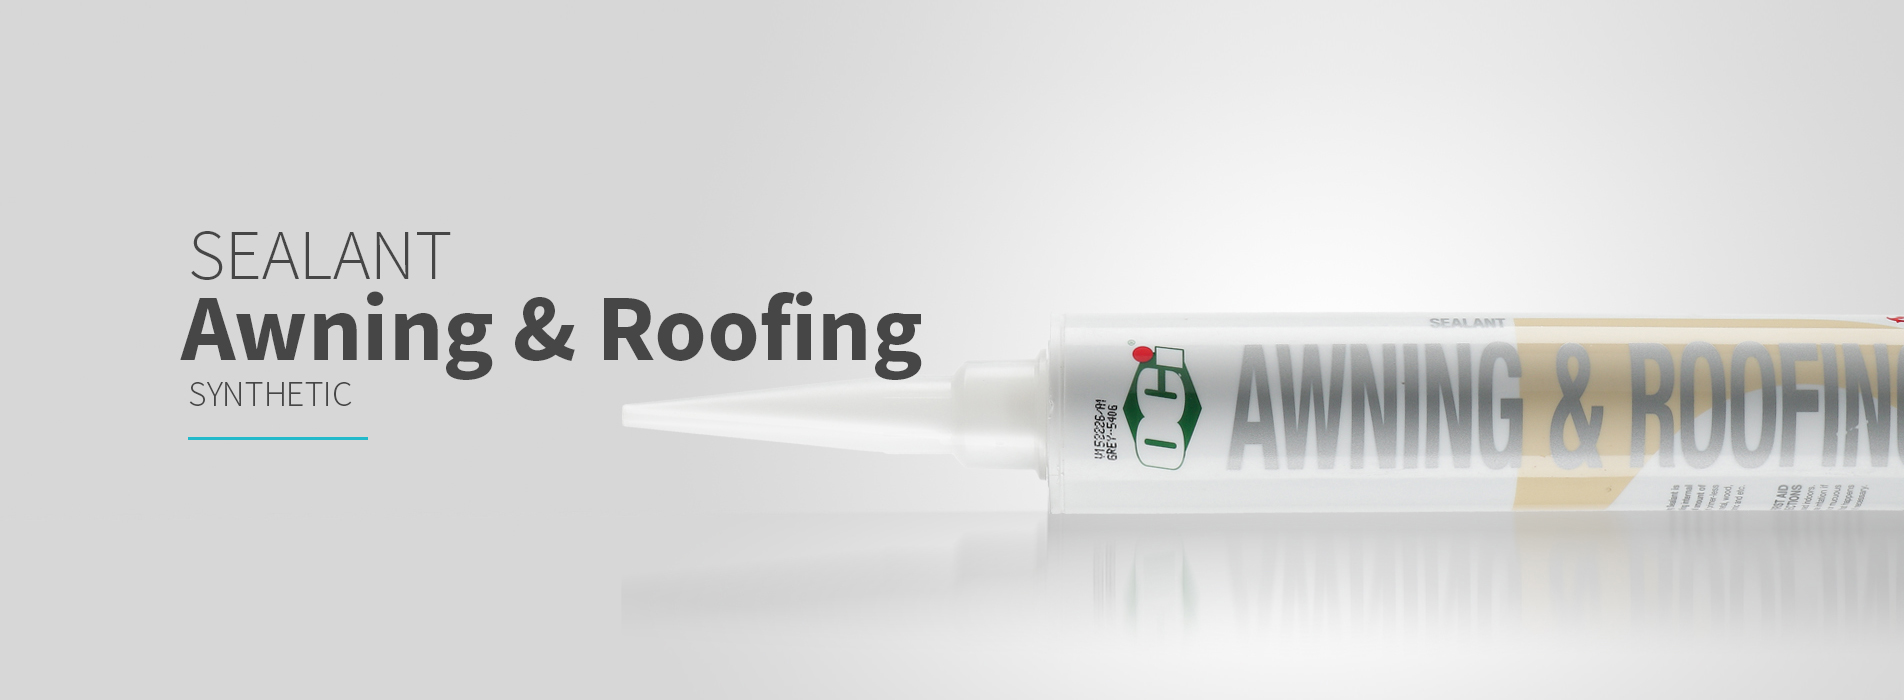 OCI Awning & Roofing Sealant for interior and exterior applications containers, roofs, external walling, window and door caulking